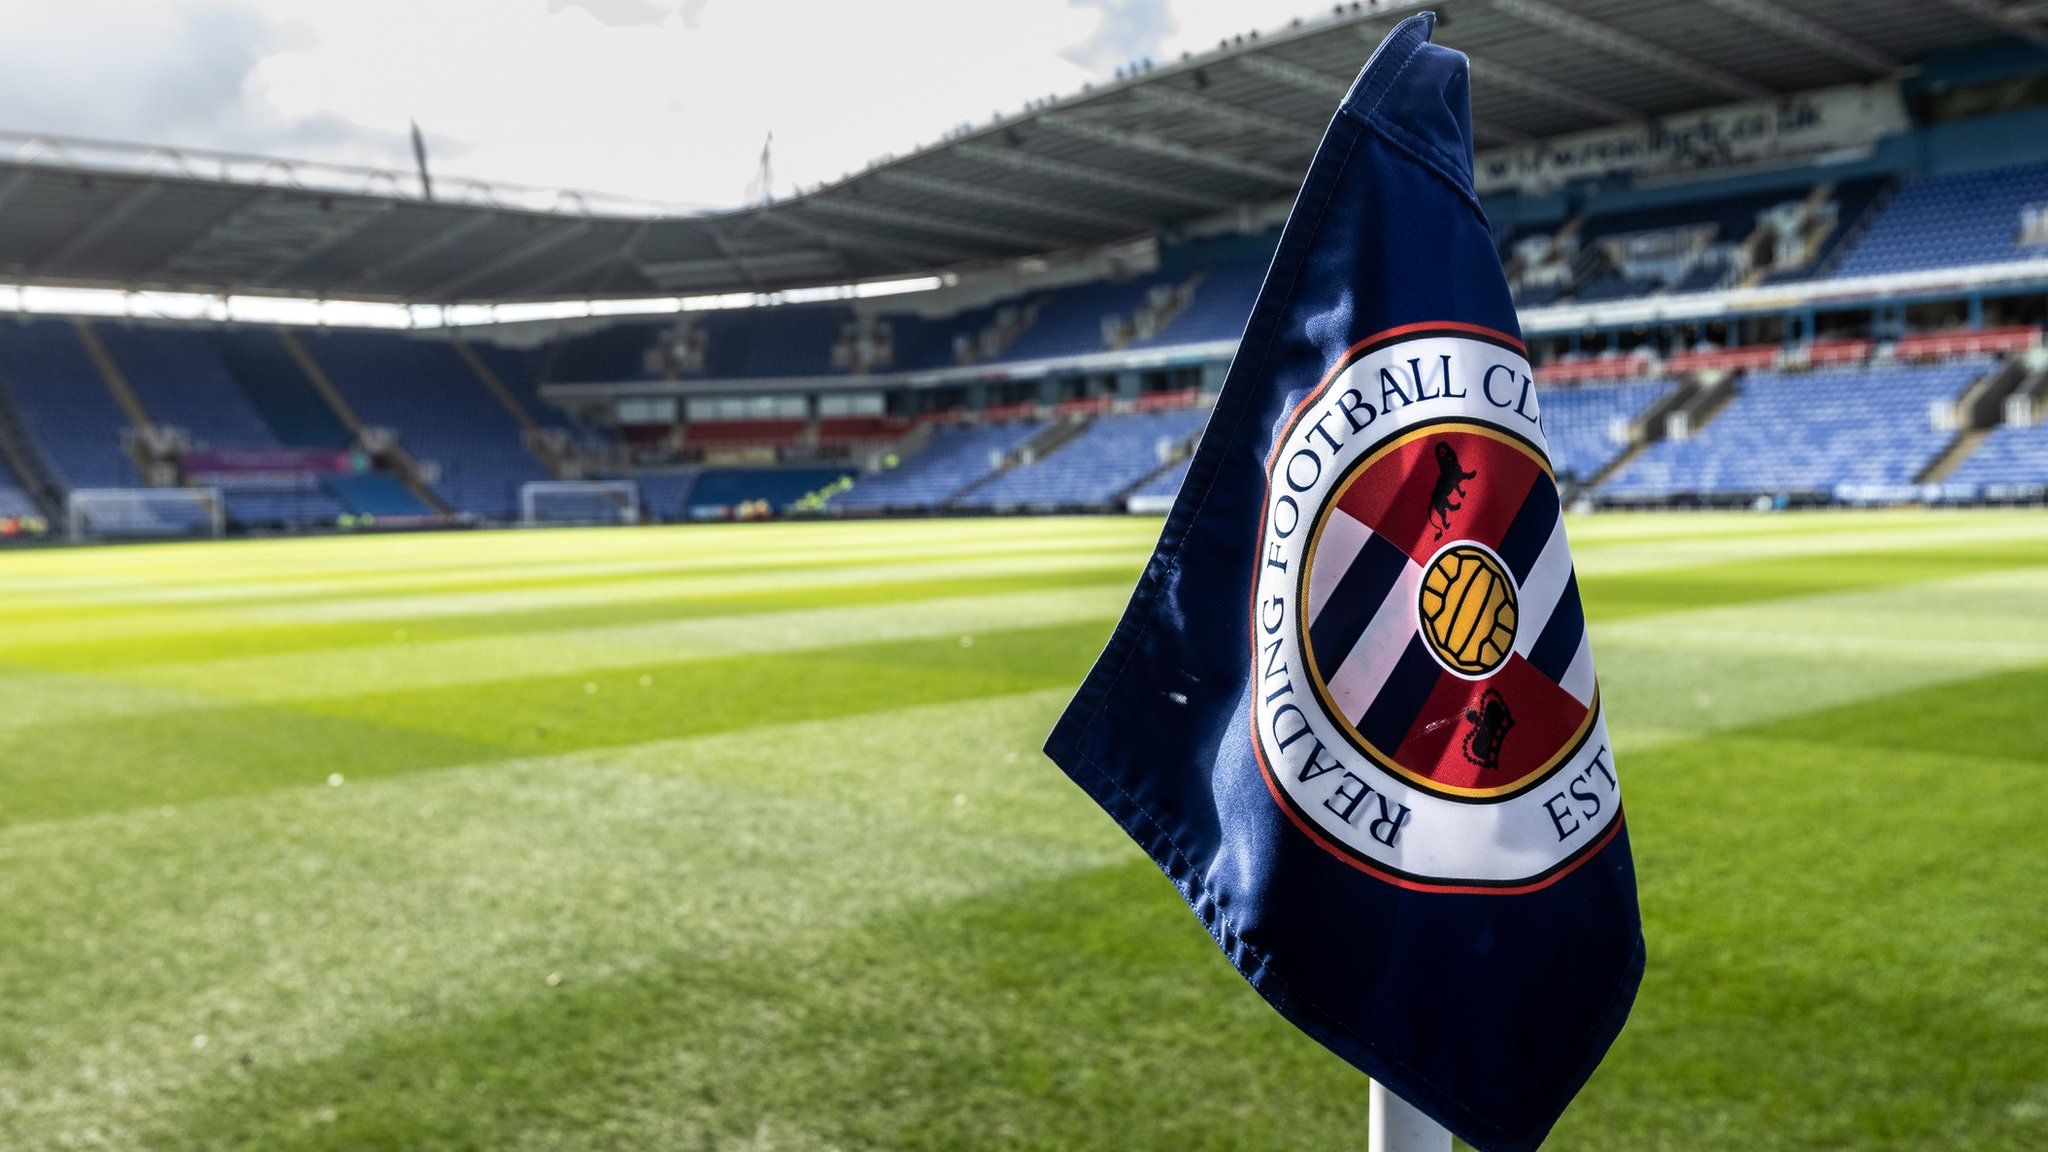 Reading FC's owners are looking for new investors to provide financial stability at the club following a period of major unrest.